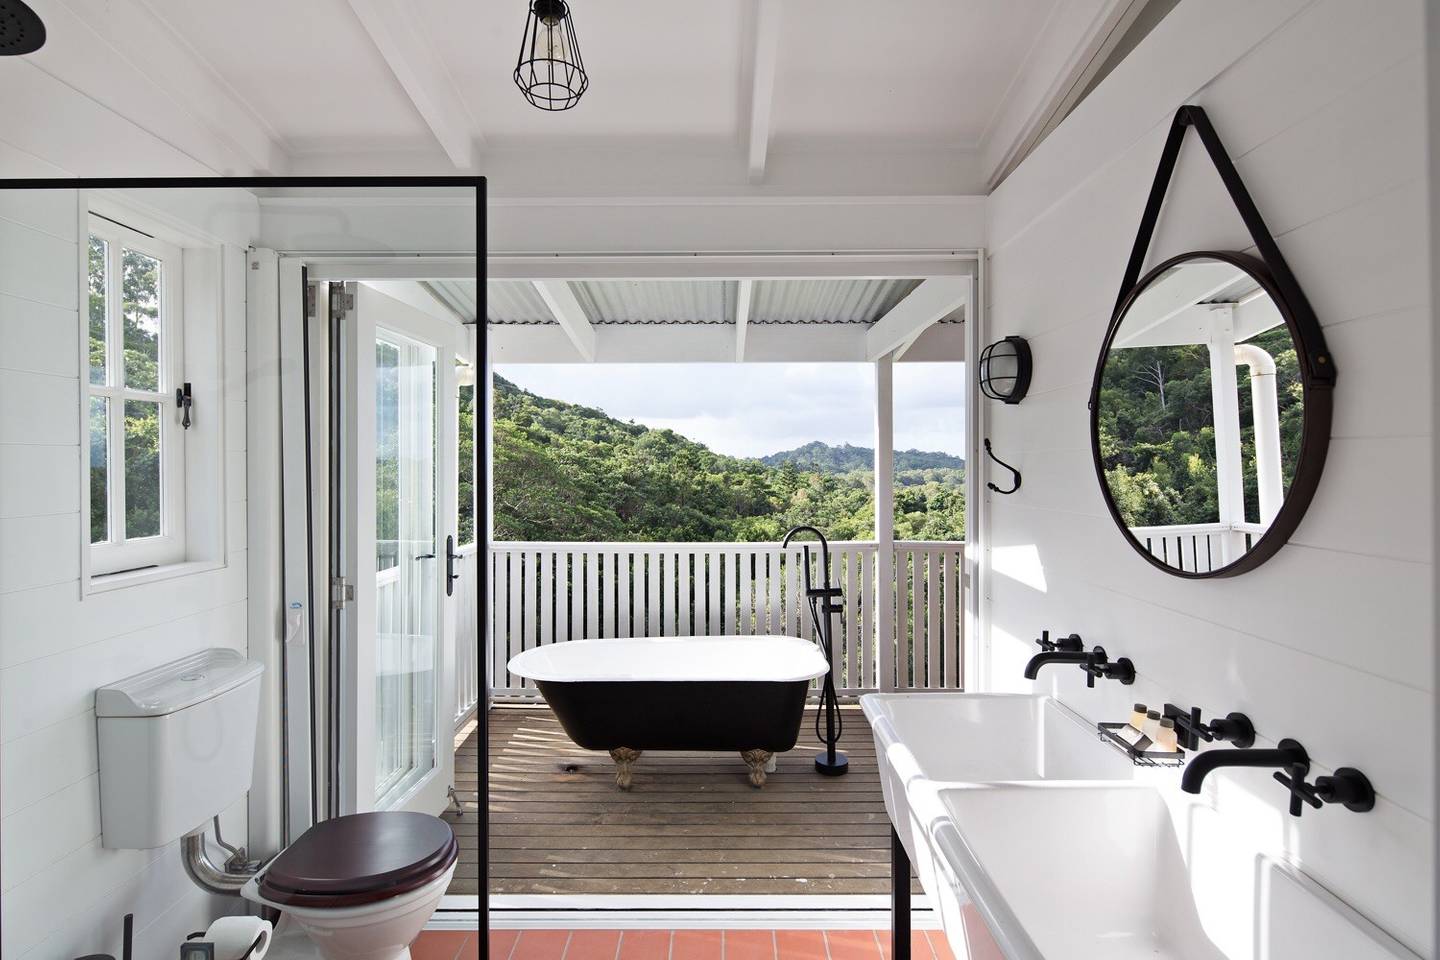 A cute little cottage perched on the hillside in the Noosa hinterland